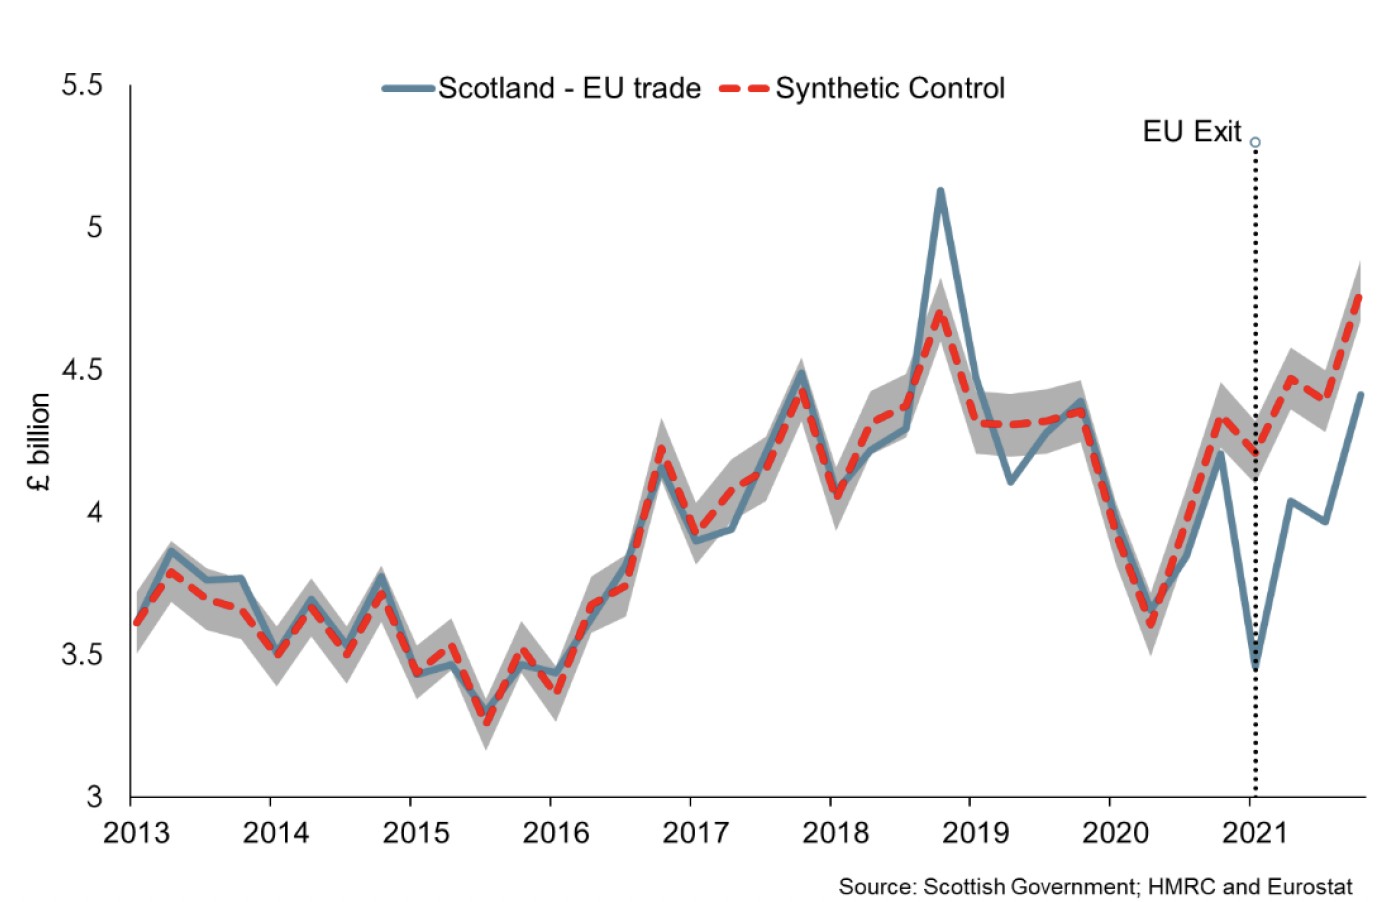 Line chart showing Scotland’s trade with the EU and a synthetic control.